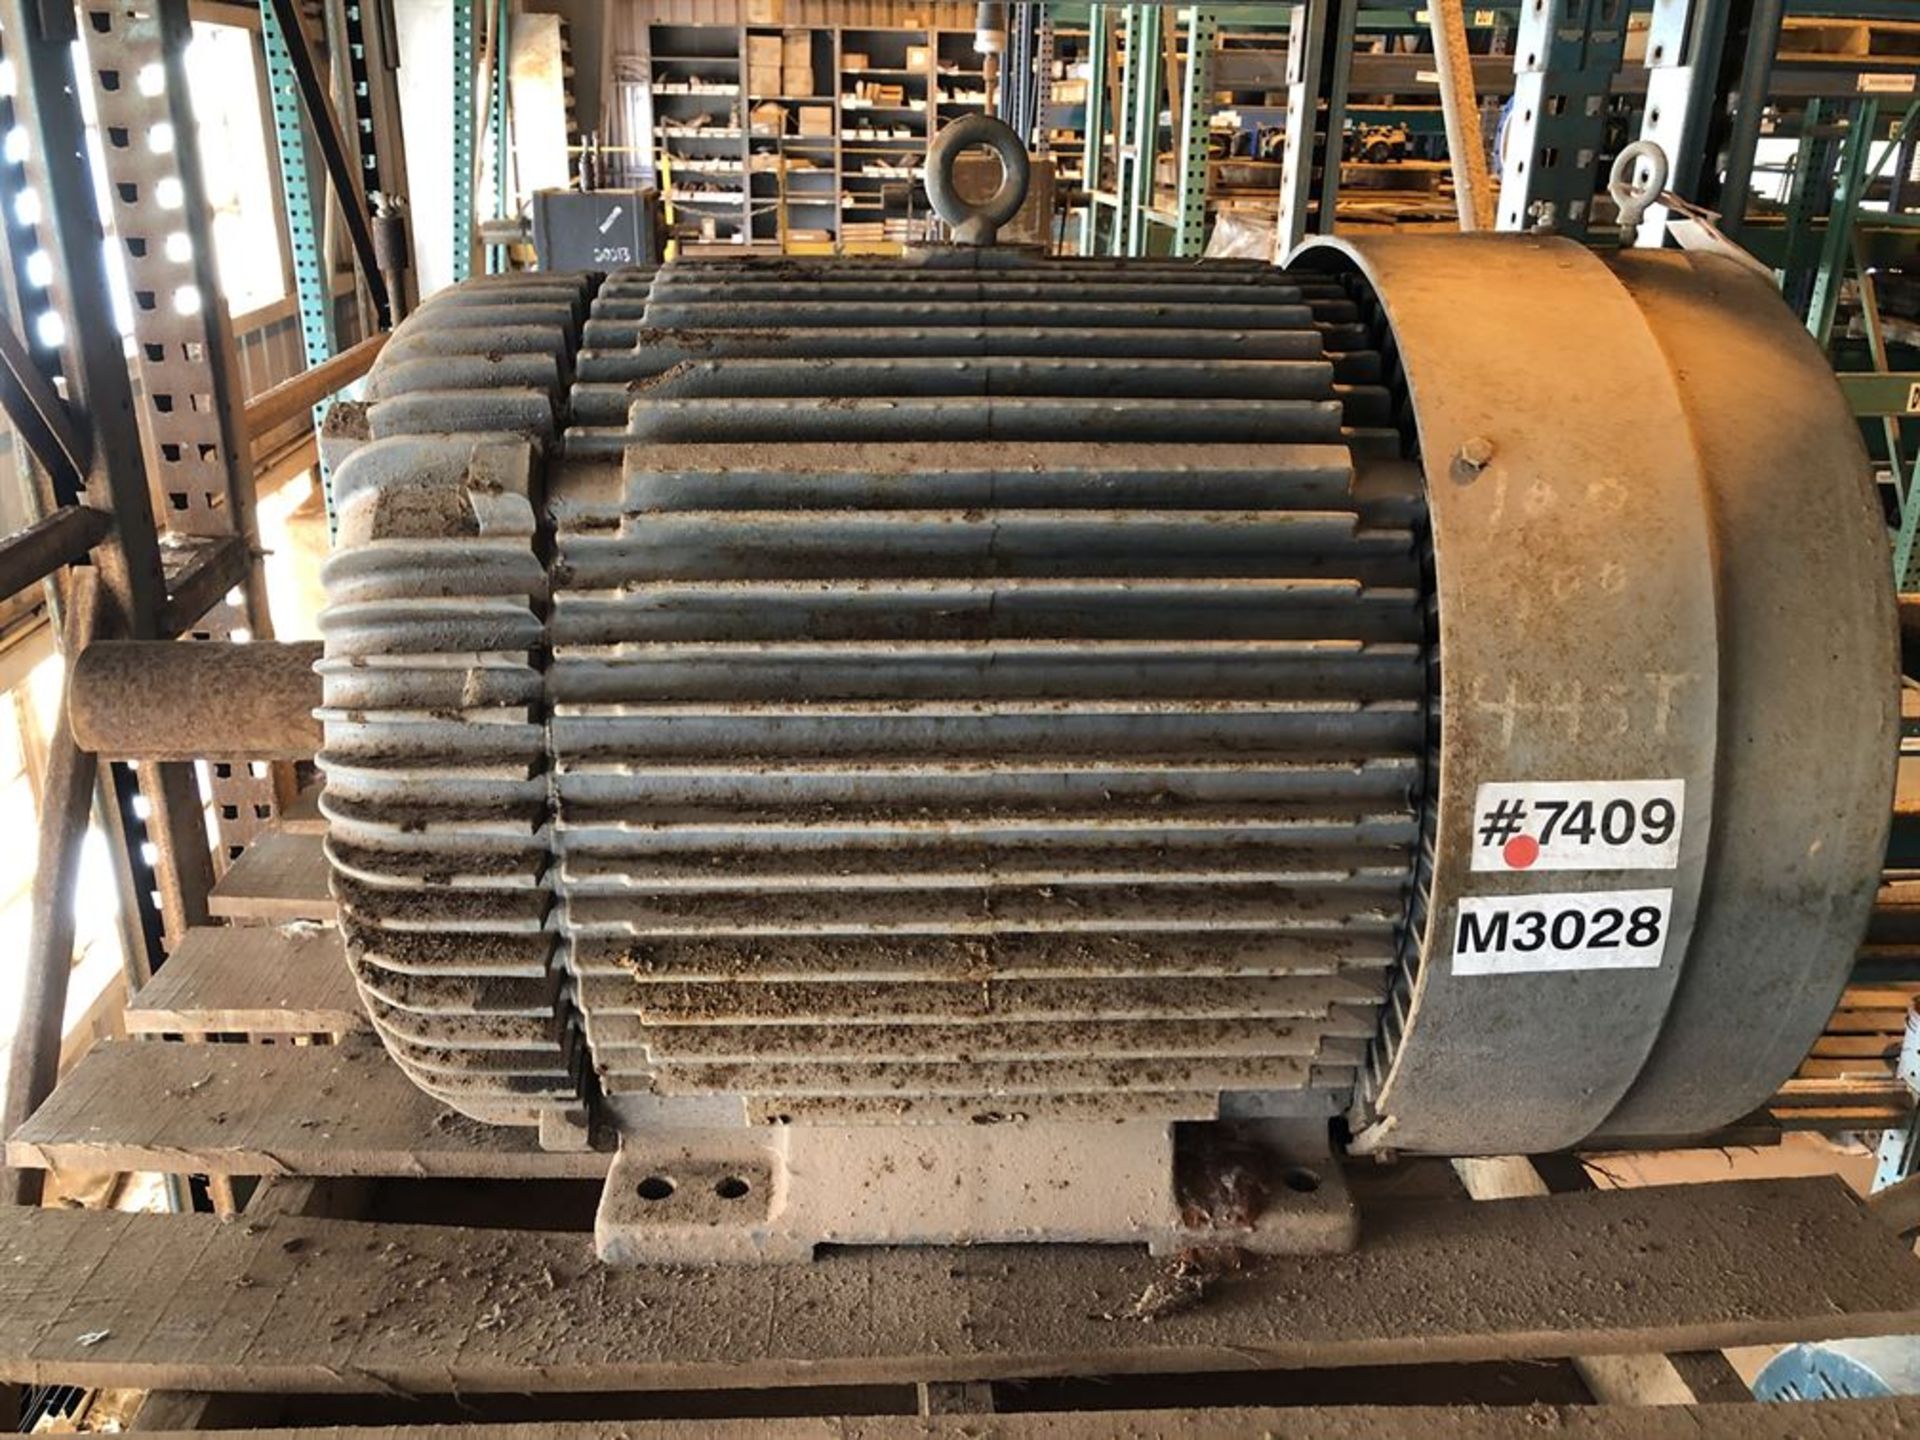 RELIANCE 100 HP Electric Motor (Location: Motor Warehouse)